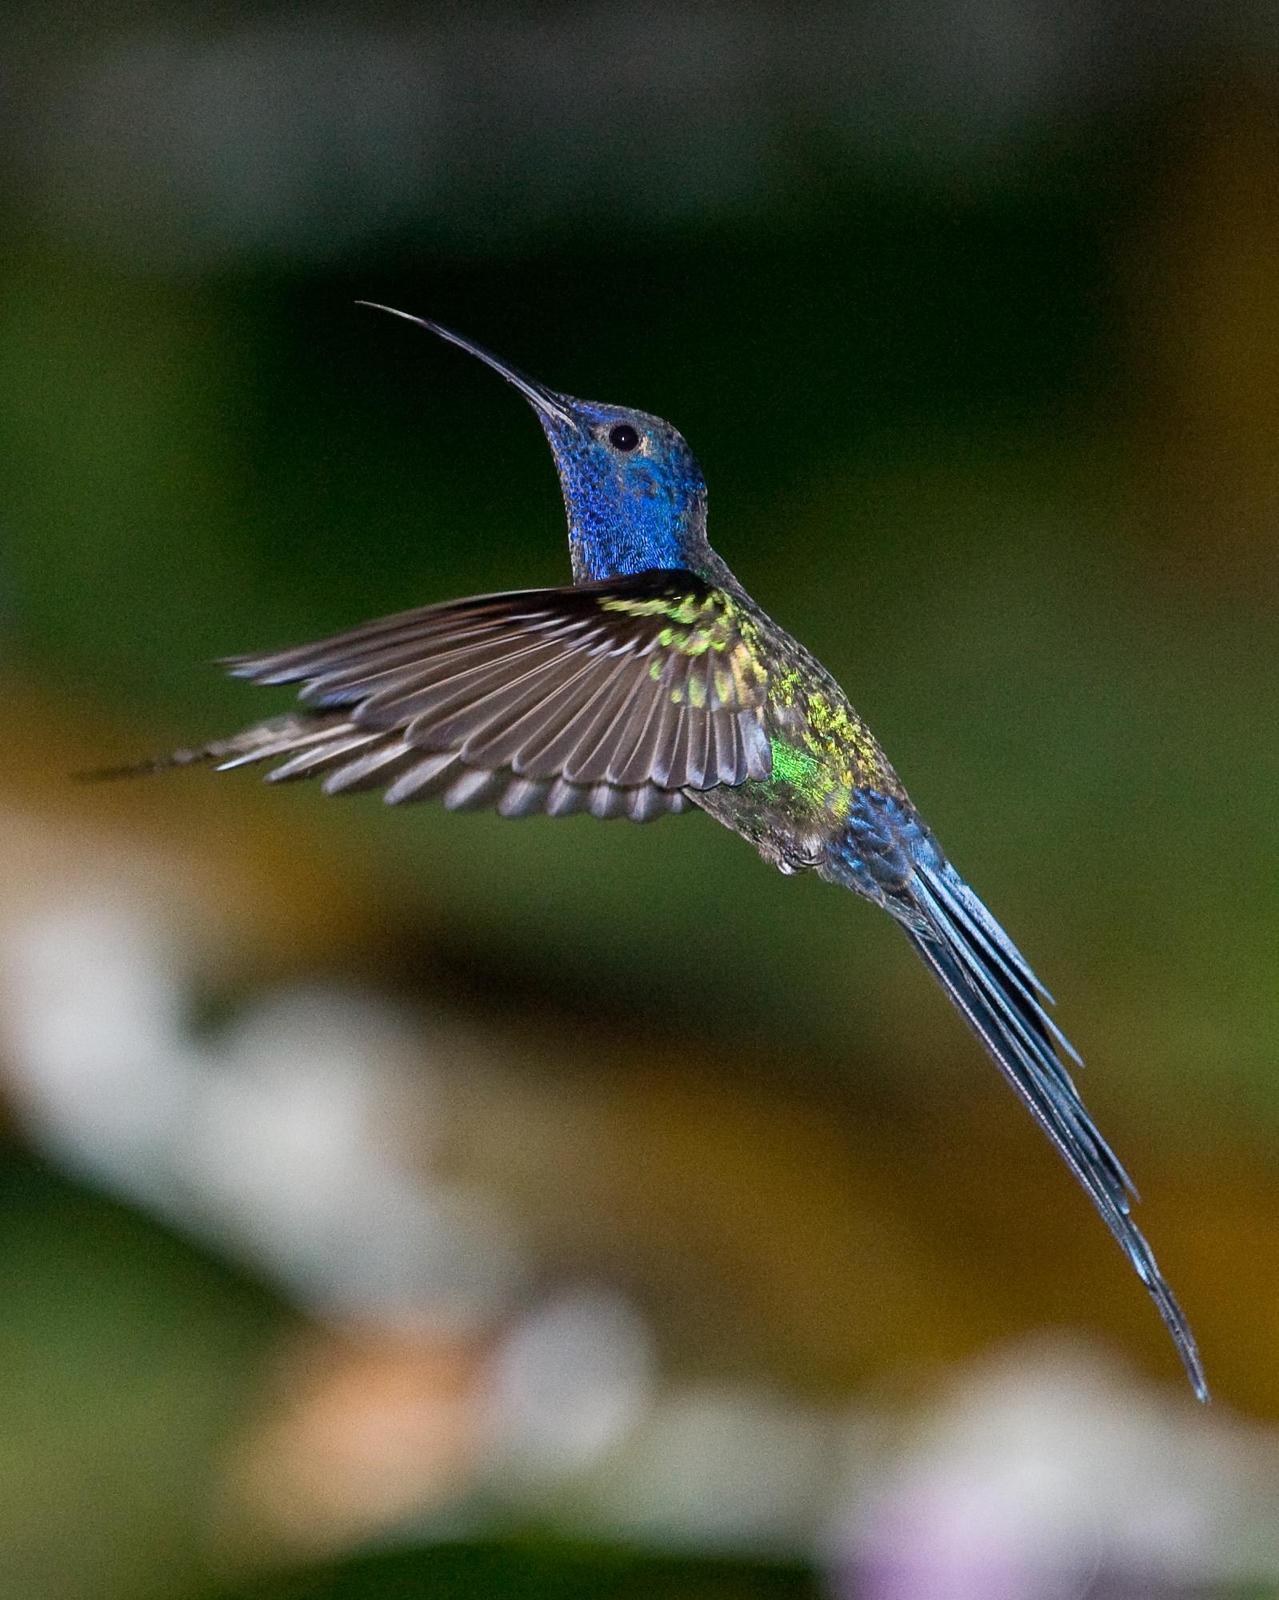 Swallow-tailed Hummingbird Photo by Robert Lewis